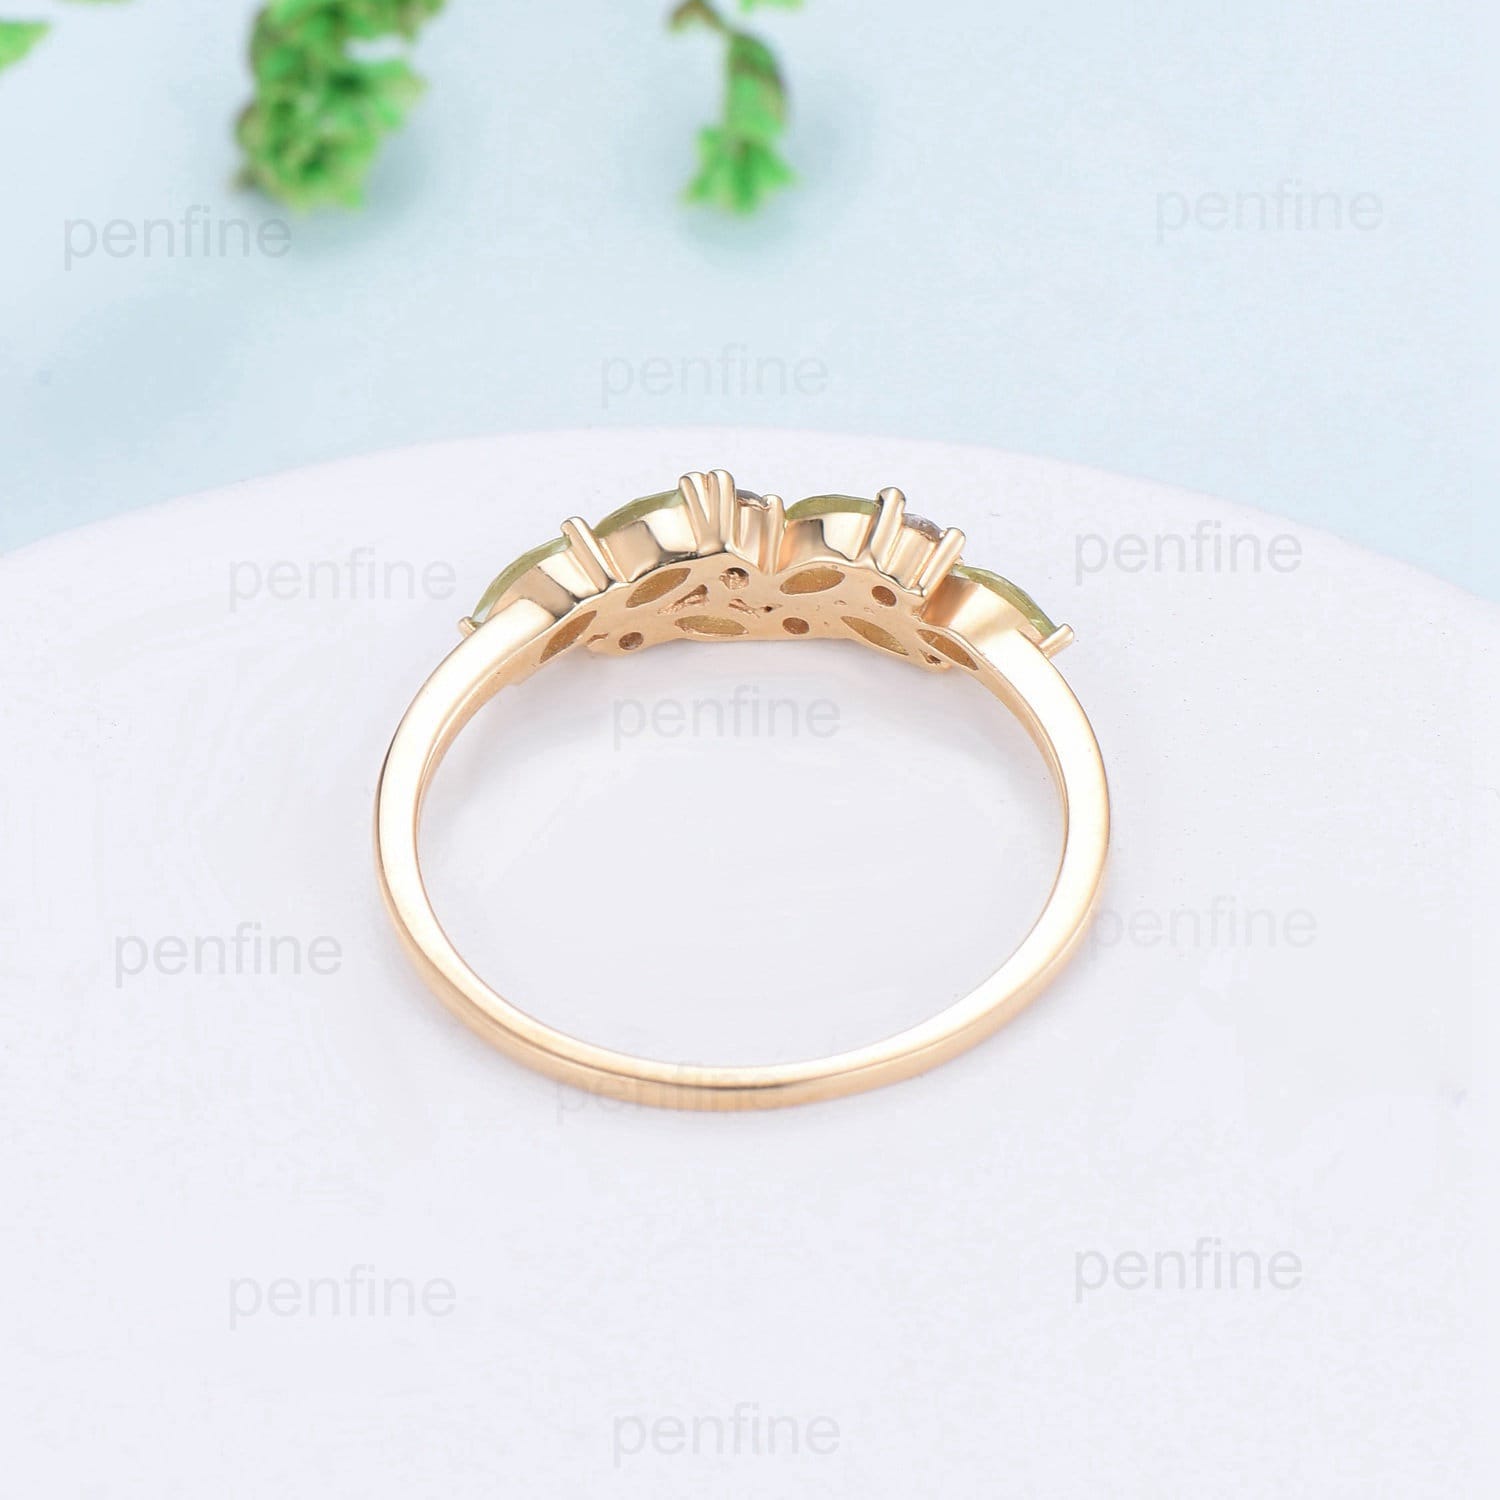 Vintage Peridot Wedding Band, Marquise cut yellow gold wedding ring, Unique cluster peridot Stacking matching Bridal ring, Anniversary gift - PENFINE